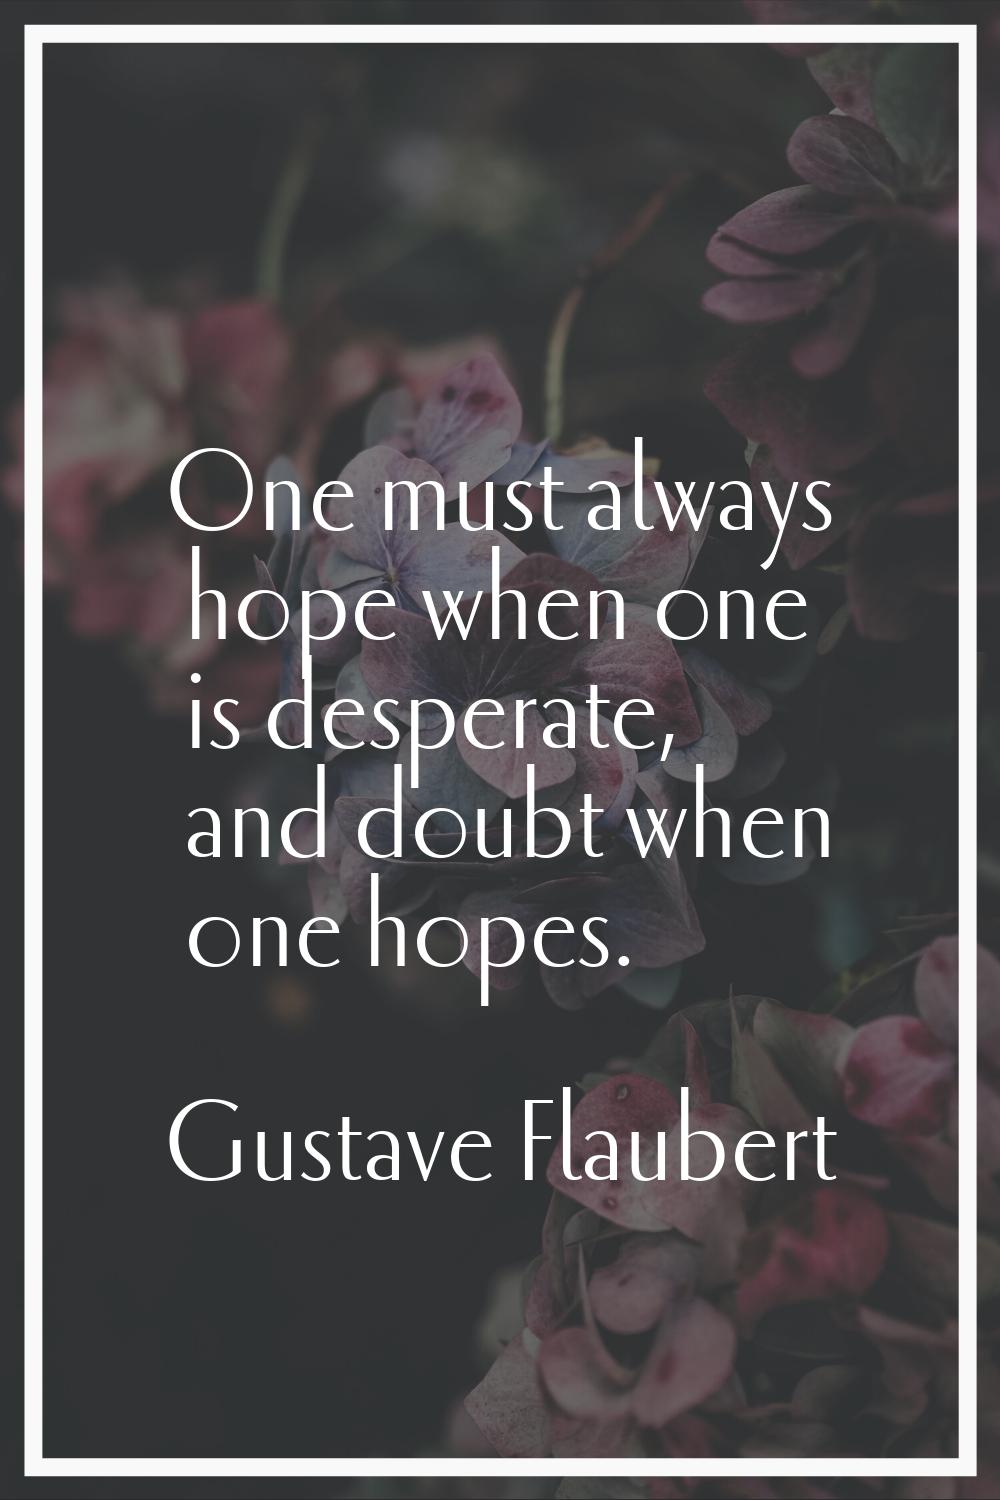 One must always hope when one is desperate, and doubt when one hopes.